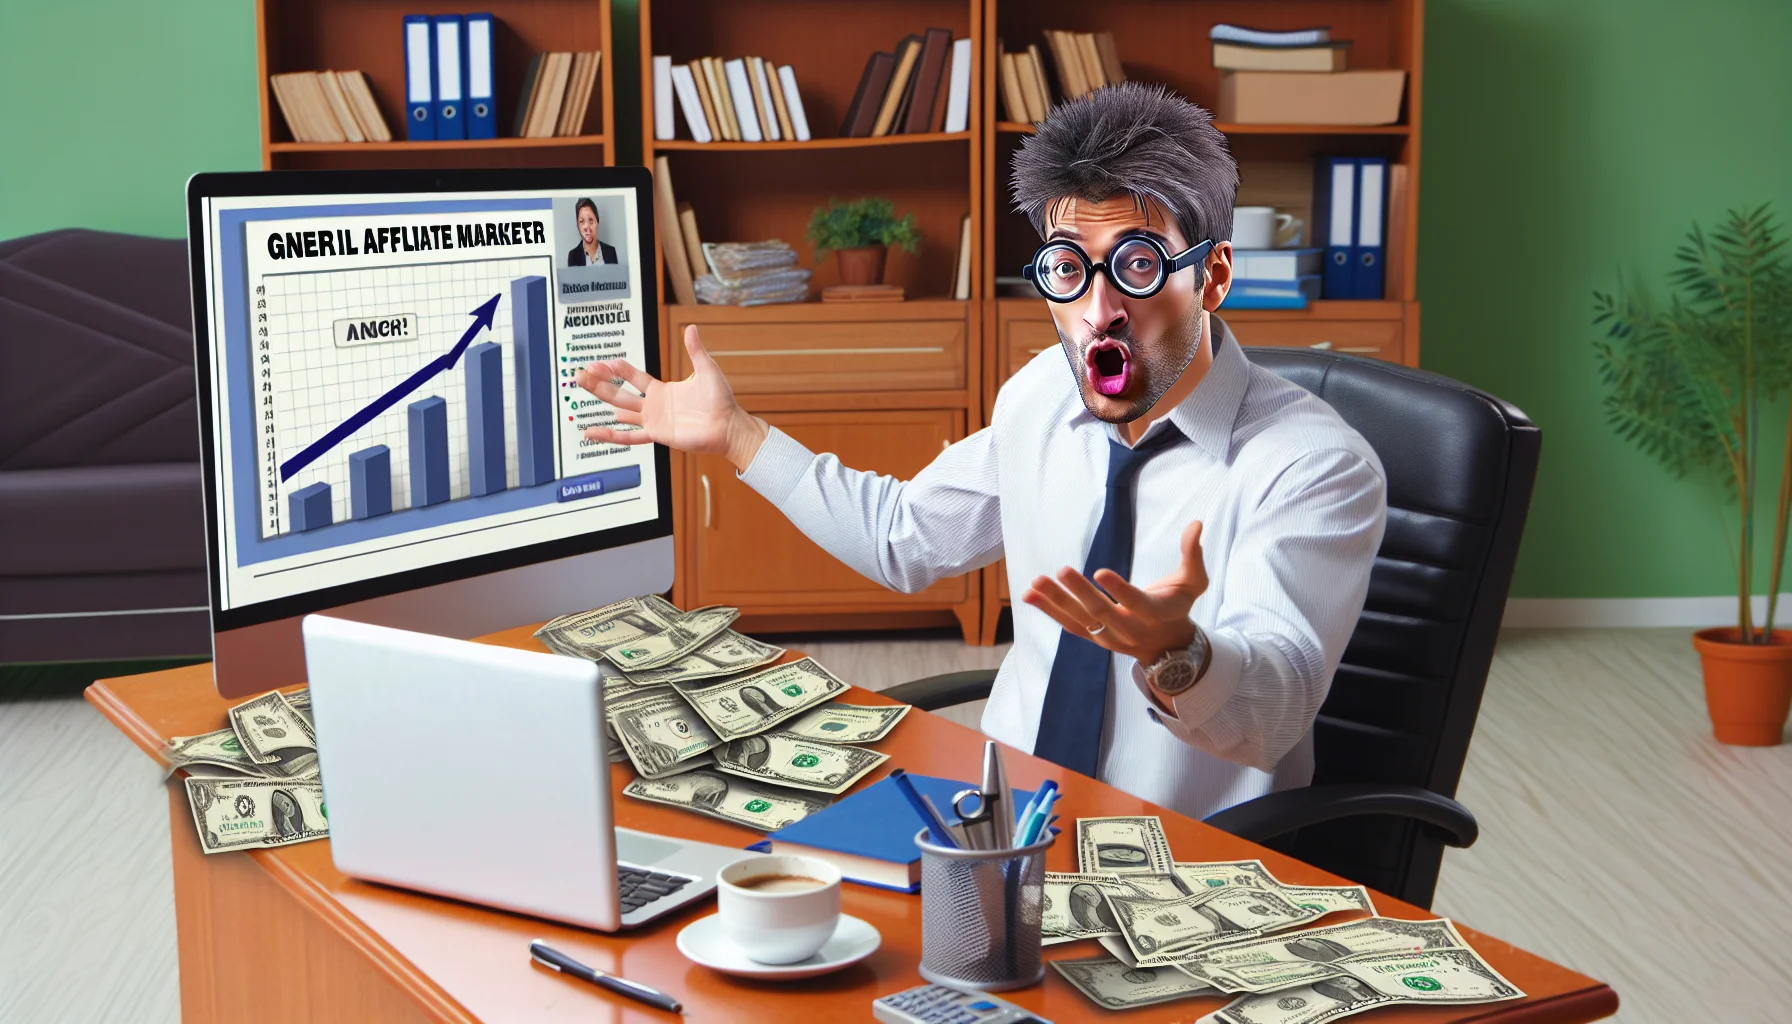 Create a comical, realistic image of a general affiliate marketer enacting a humorous scenario related to making money online. The scene may include them enthusiastically demonstrating a growth chart on a computer screen. They sit in a home office, with scattered money bills, a cup of coffee, and essential marketing books nearby. The affiliate marketer could be a middle-aged Caucasian female with glasses and a casual business attire.